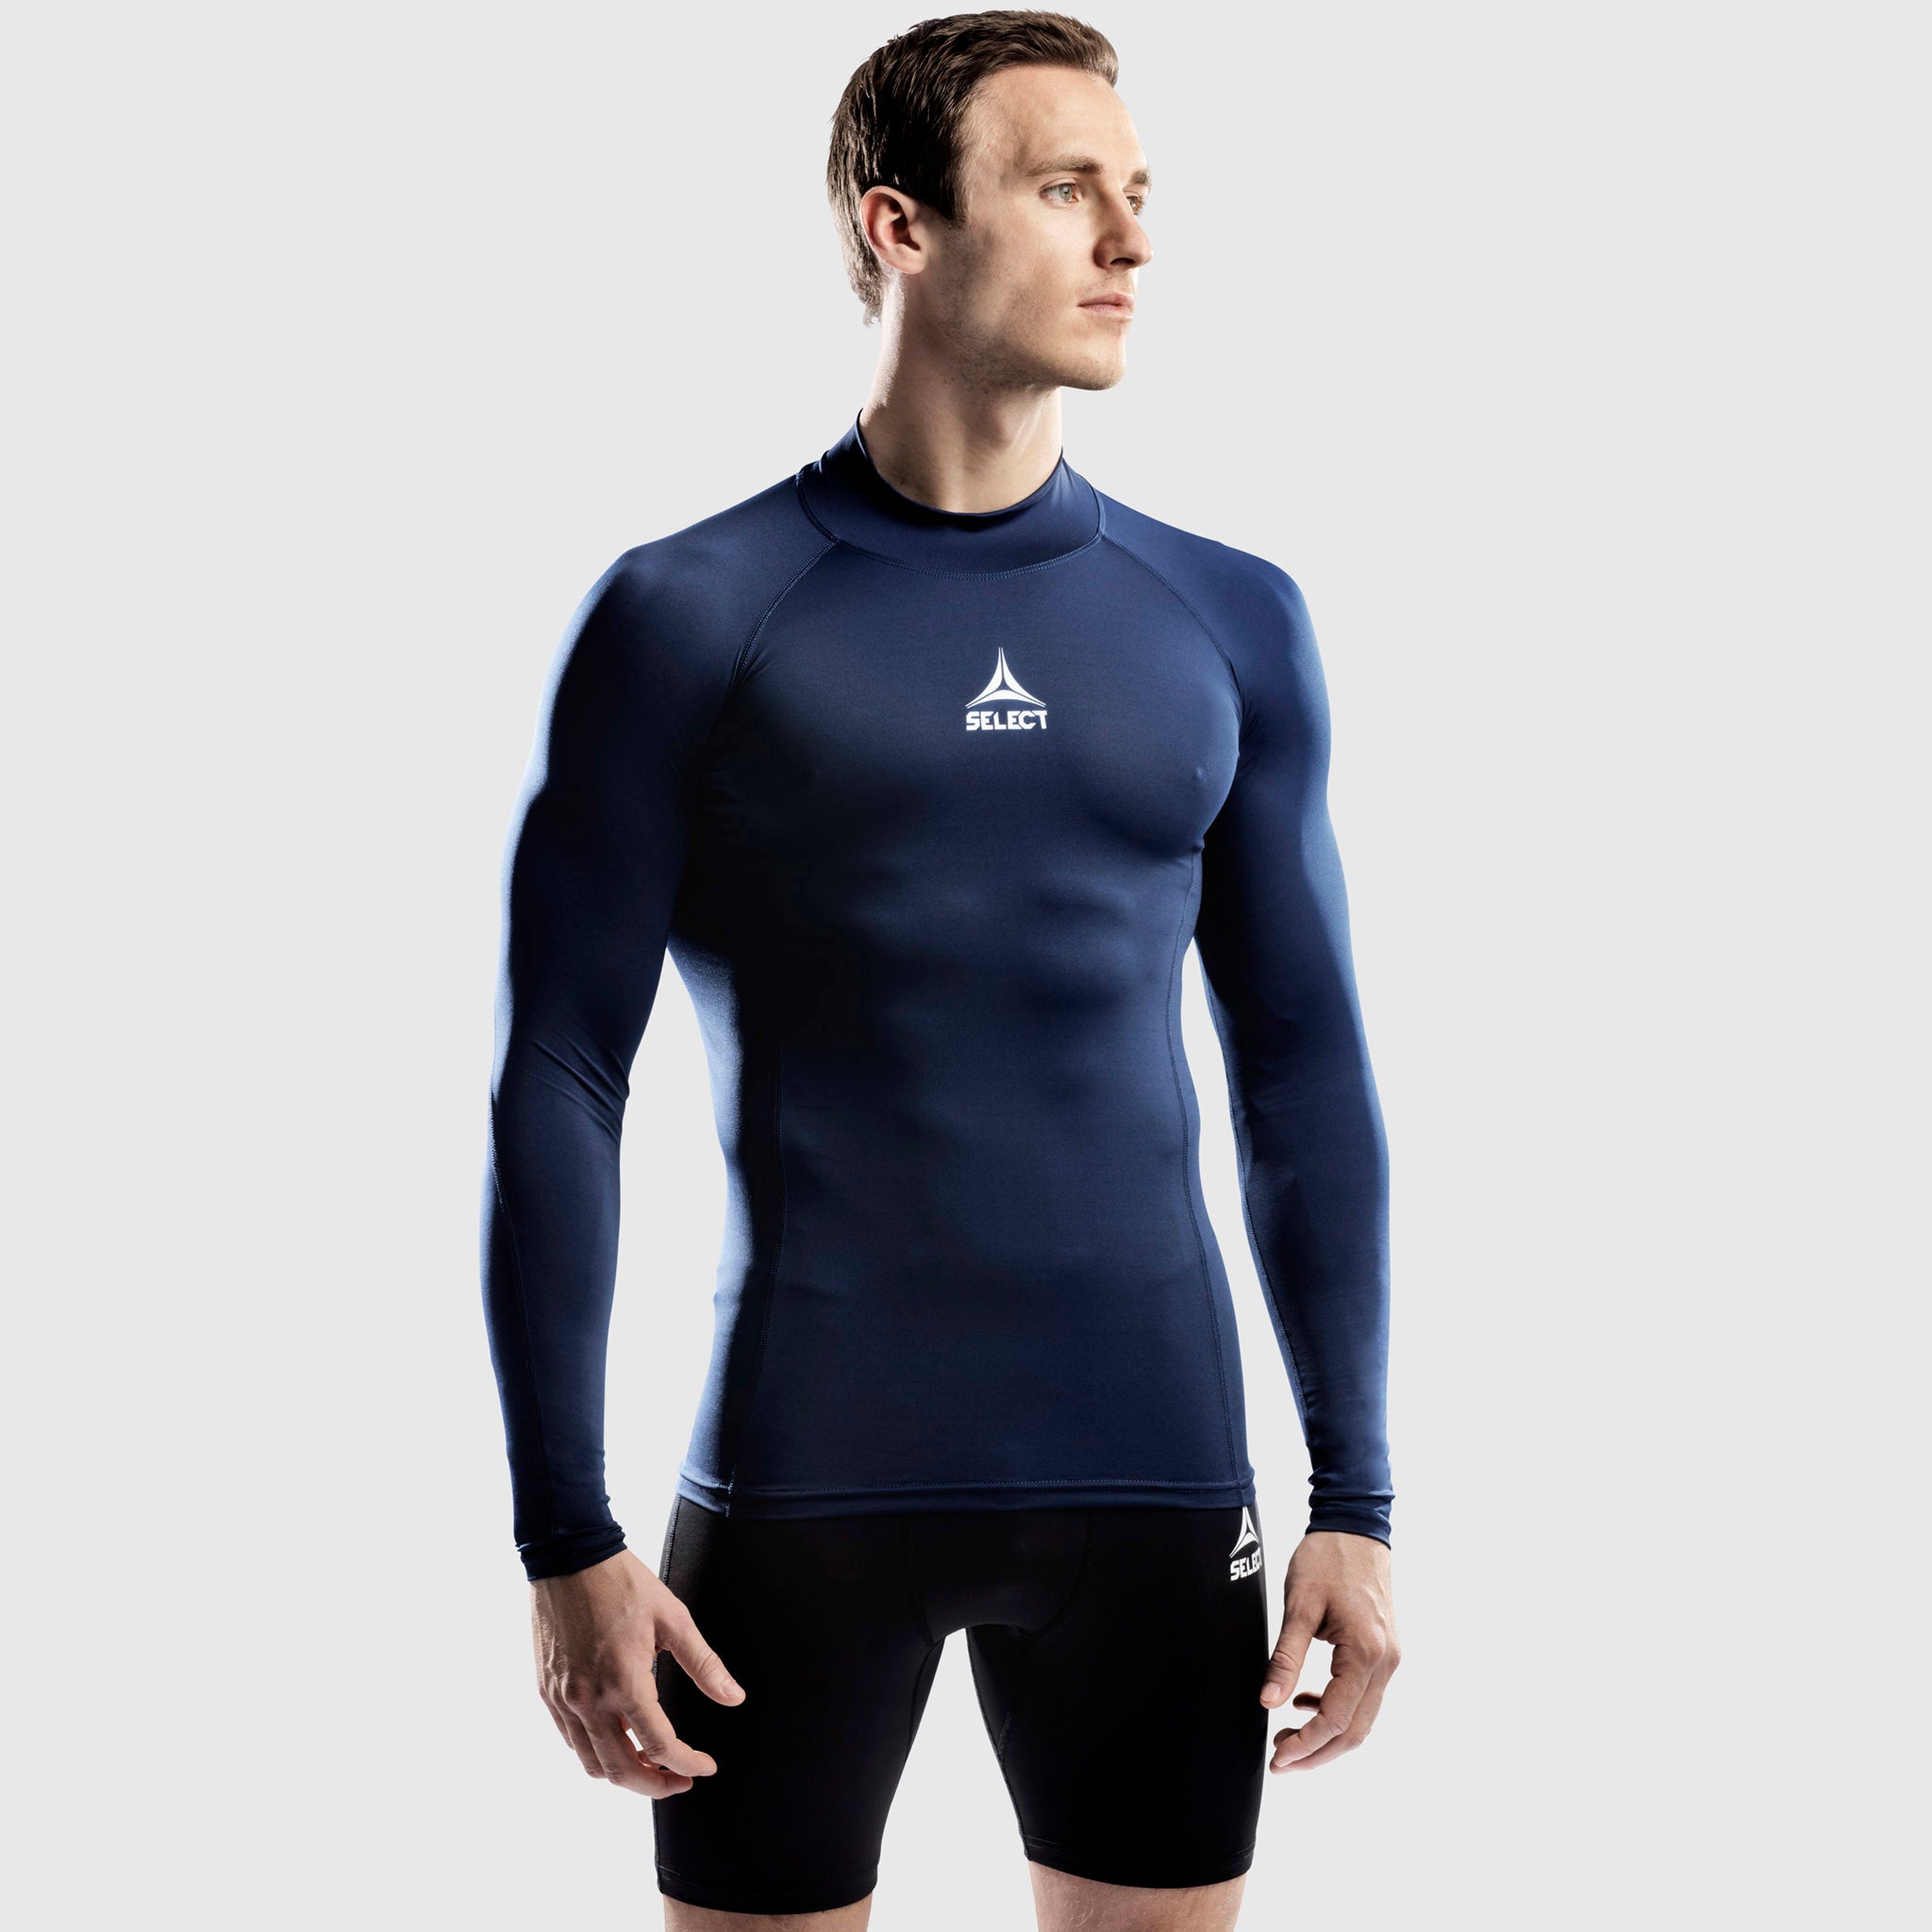  TELALEO 5 Pack Men's Thermal Compression Shirts Long Sleeve  Turtle Mock Neck Shirts Athletic Base Layer Top Winter Cold Gear S :  Clothing, Shoes & Jewelry